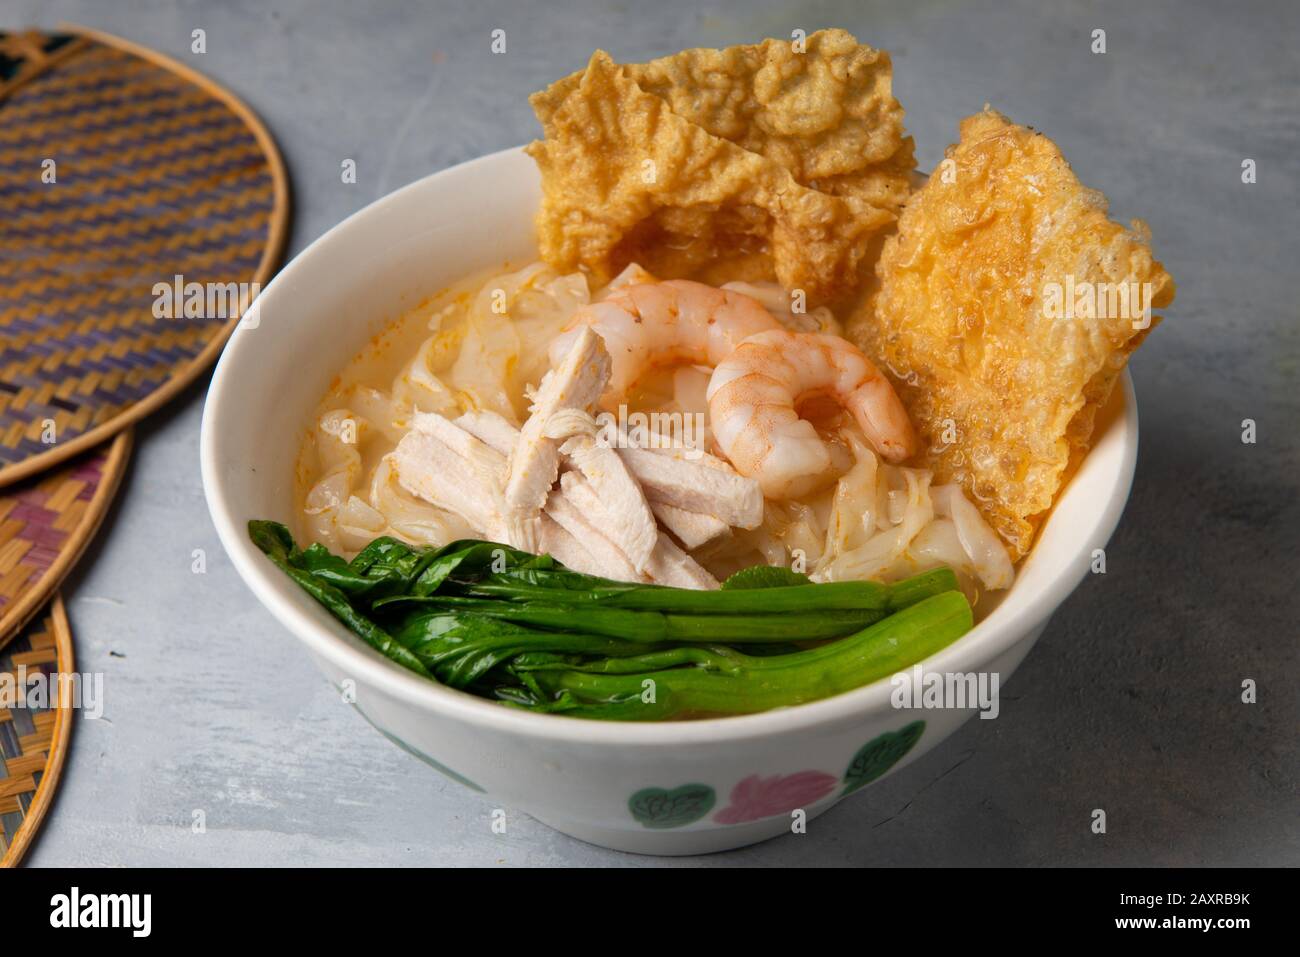 keow teow sup chinese style with background Stock Photo